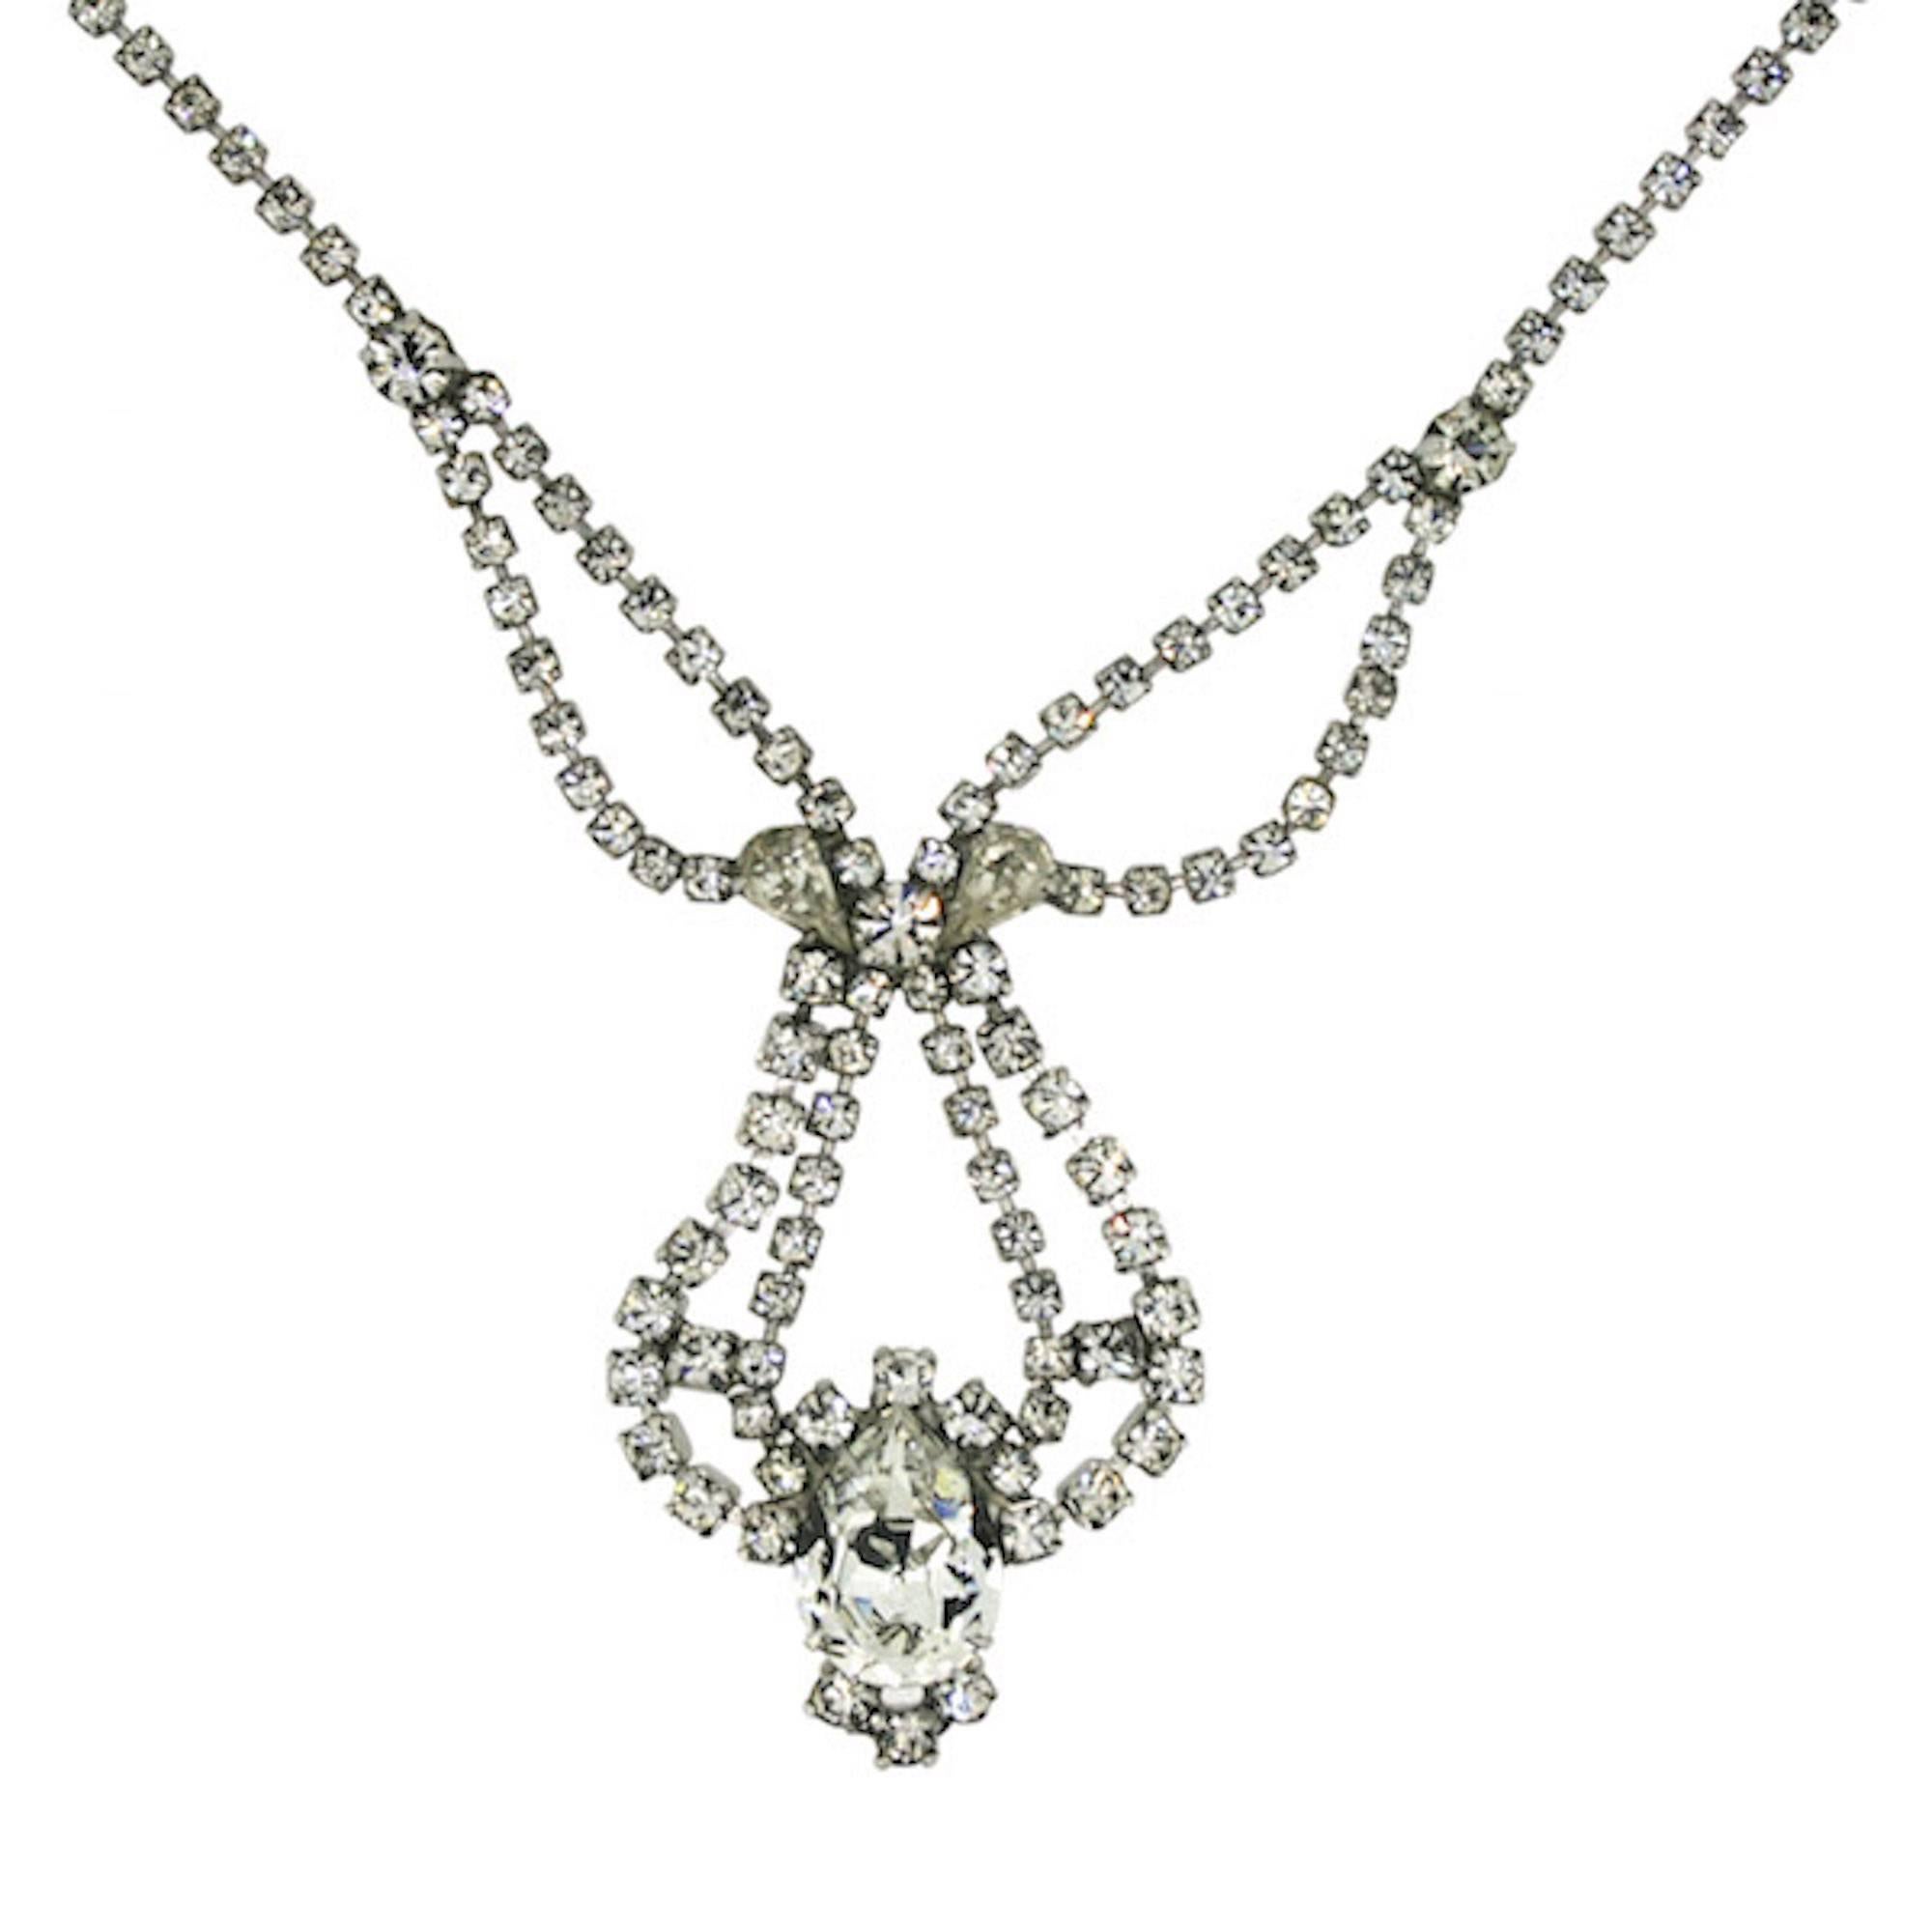 This is a glamorous diamante necklace by American costume jewellery manufacturer, Weiss. It dates from the 1960s.

Condition Report
Very Good - Minor rubbing to the silver tone metal on the reverse of the necklace due to wear over the decades. This